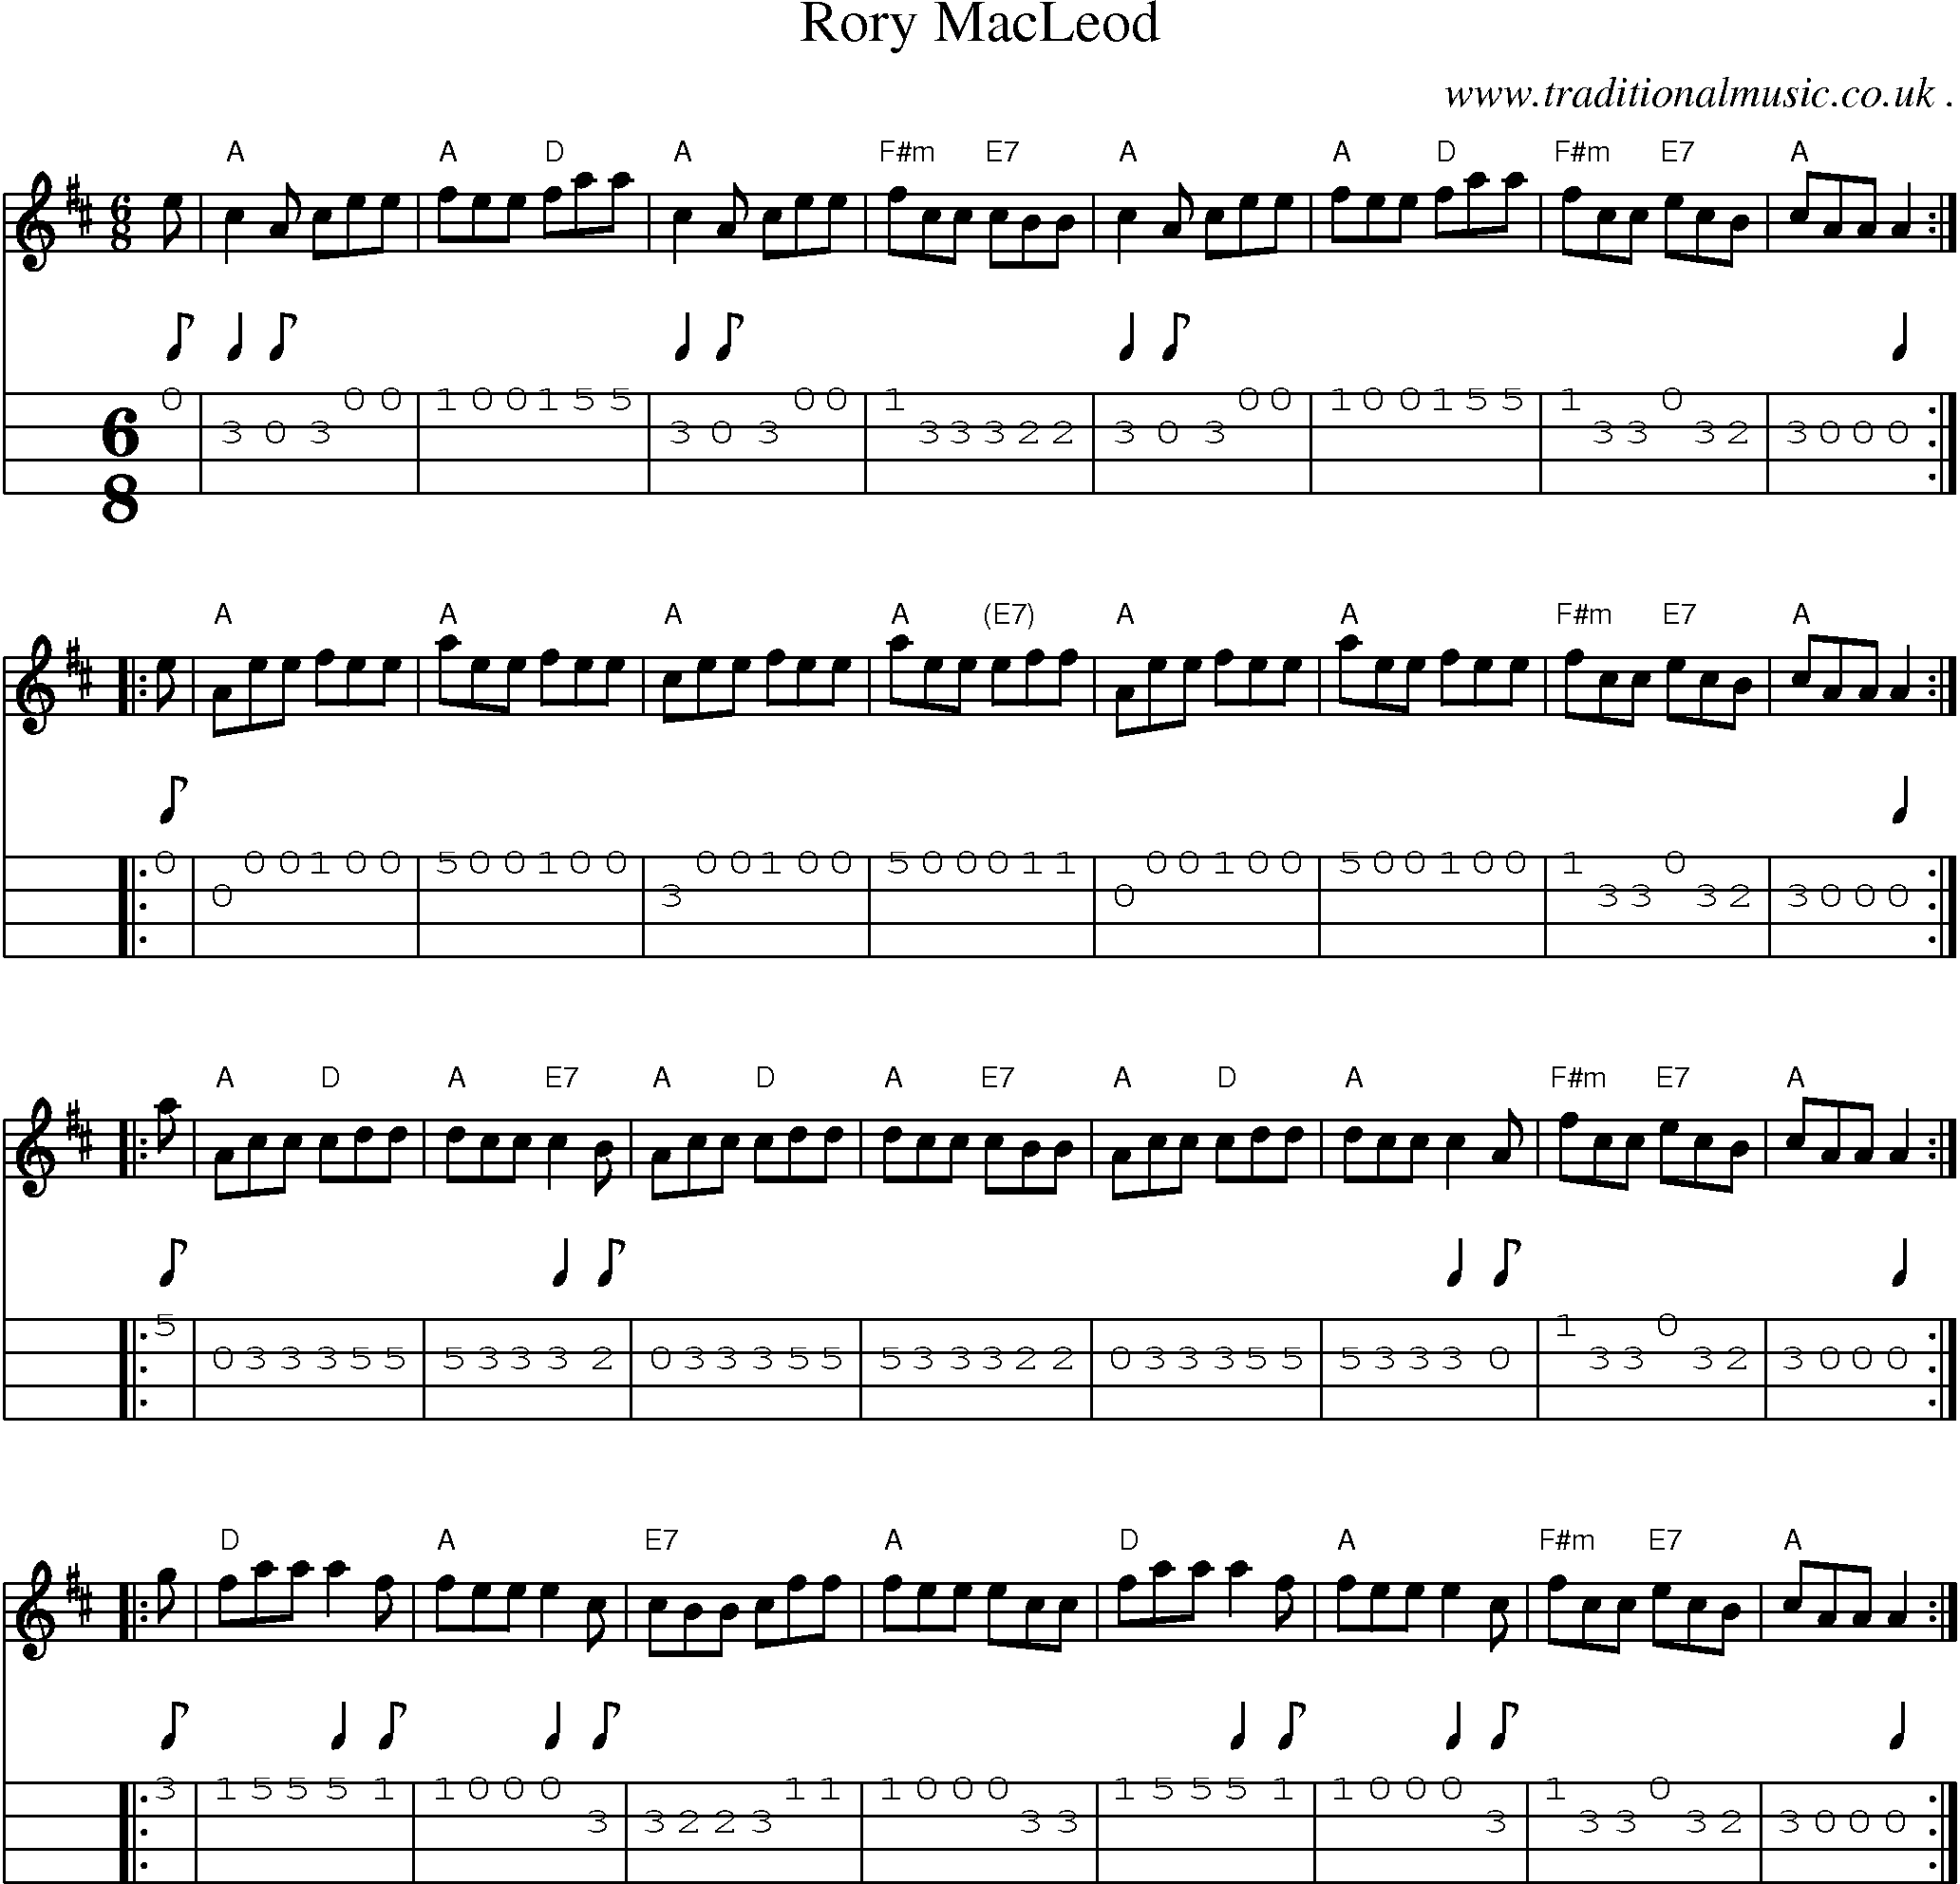 Sheet-music  score, Chords and Mandolin Tabs for Rory Macleod